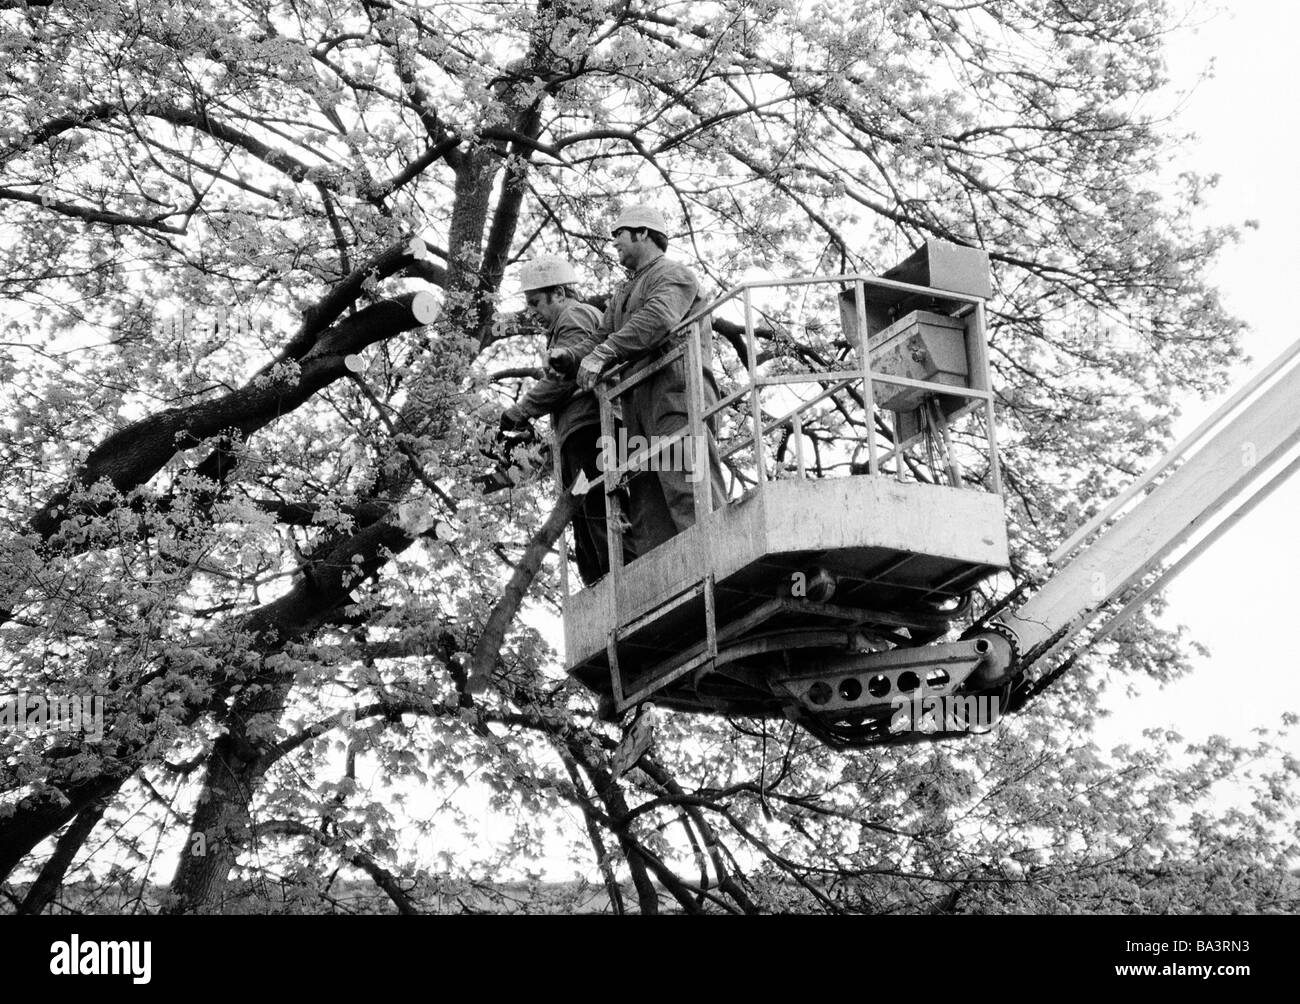 Eighties, black and white photo, landscape preservation, tree pruning, two gardeners stand on a hydraulic ramp and prune a tree, aged 30 to 40 years Stock Photo